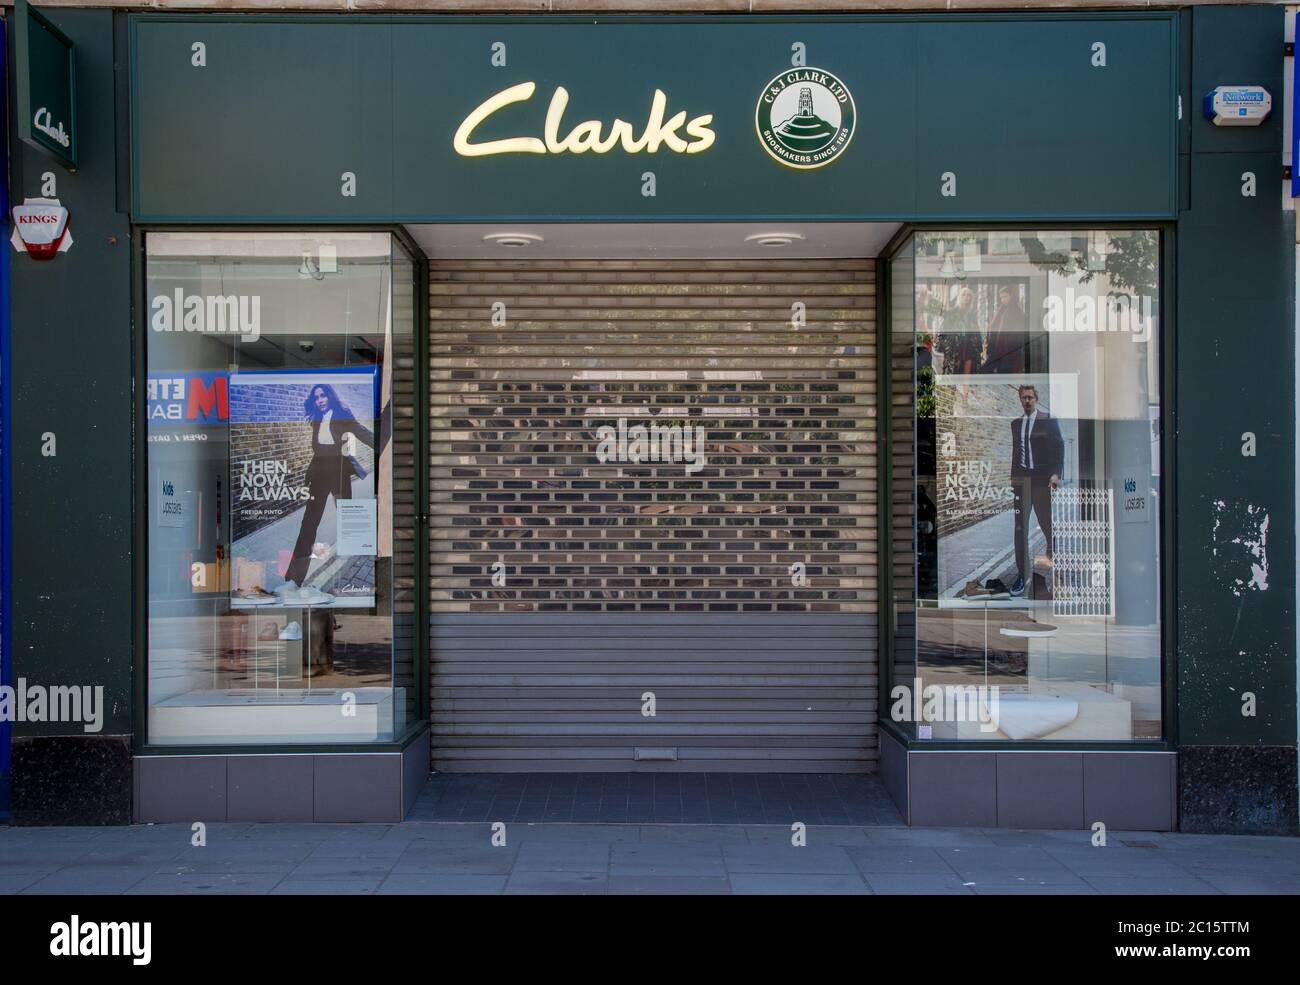 Clarks shoe shop business closed due to 